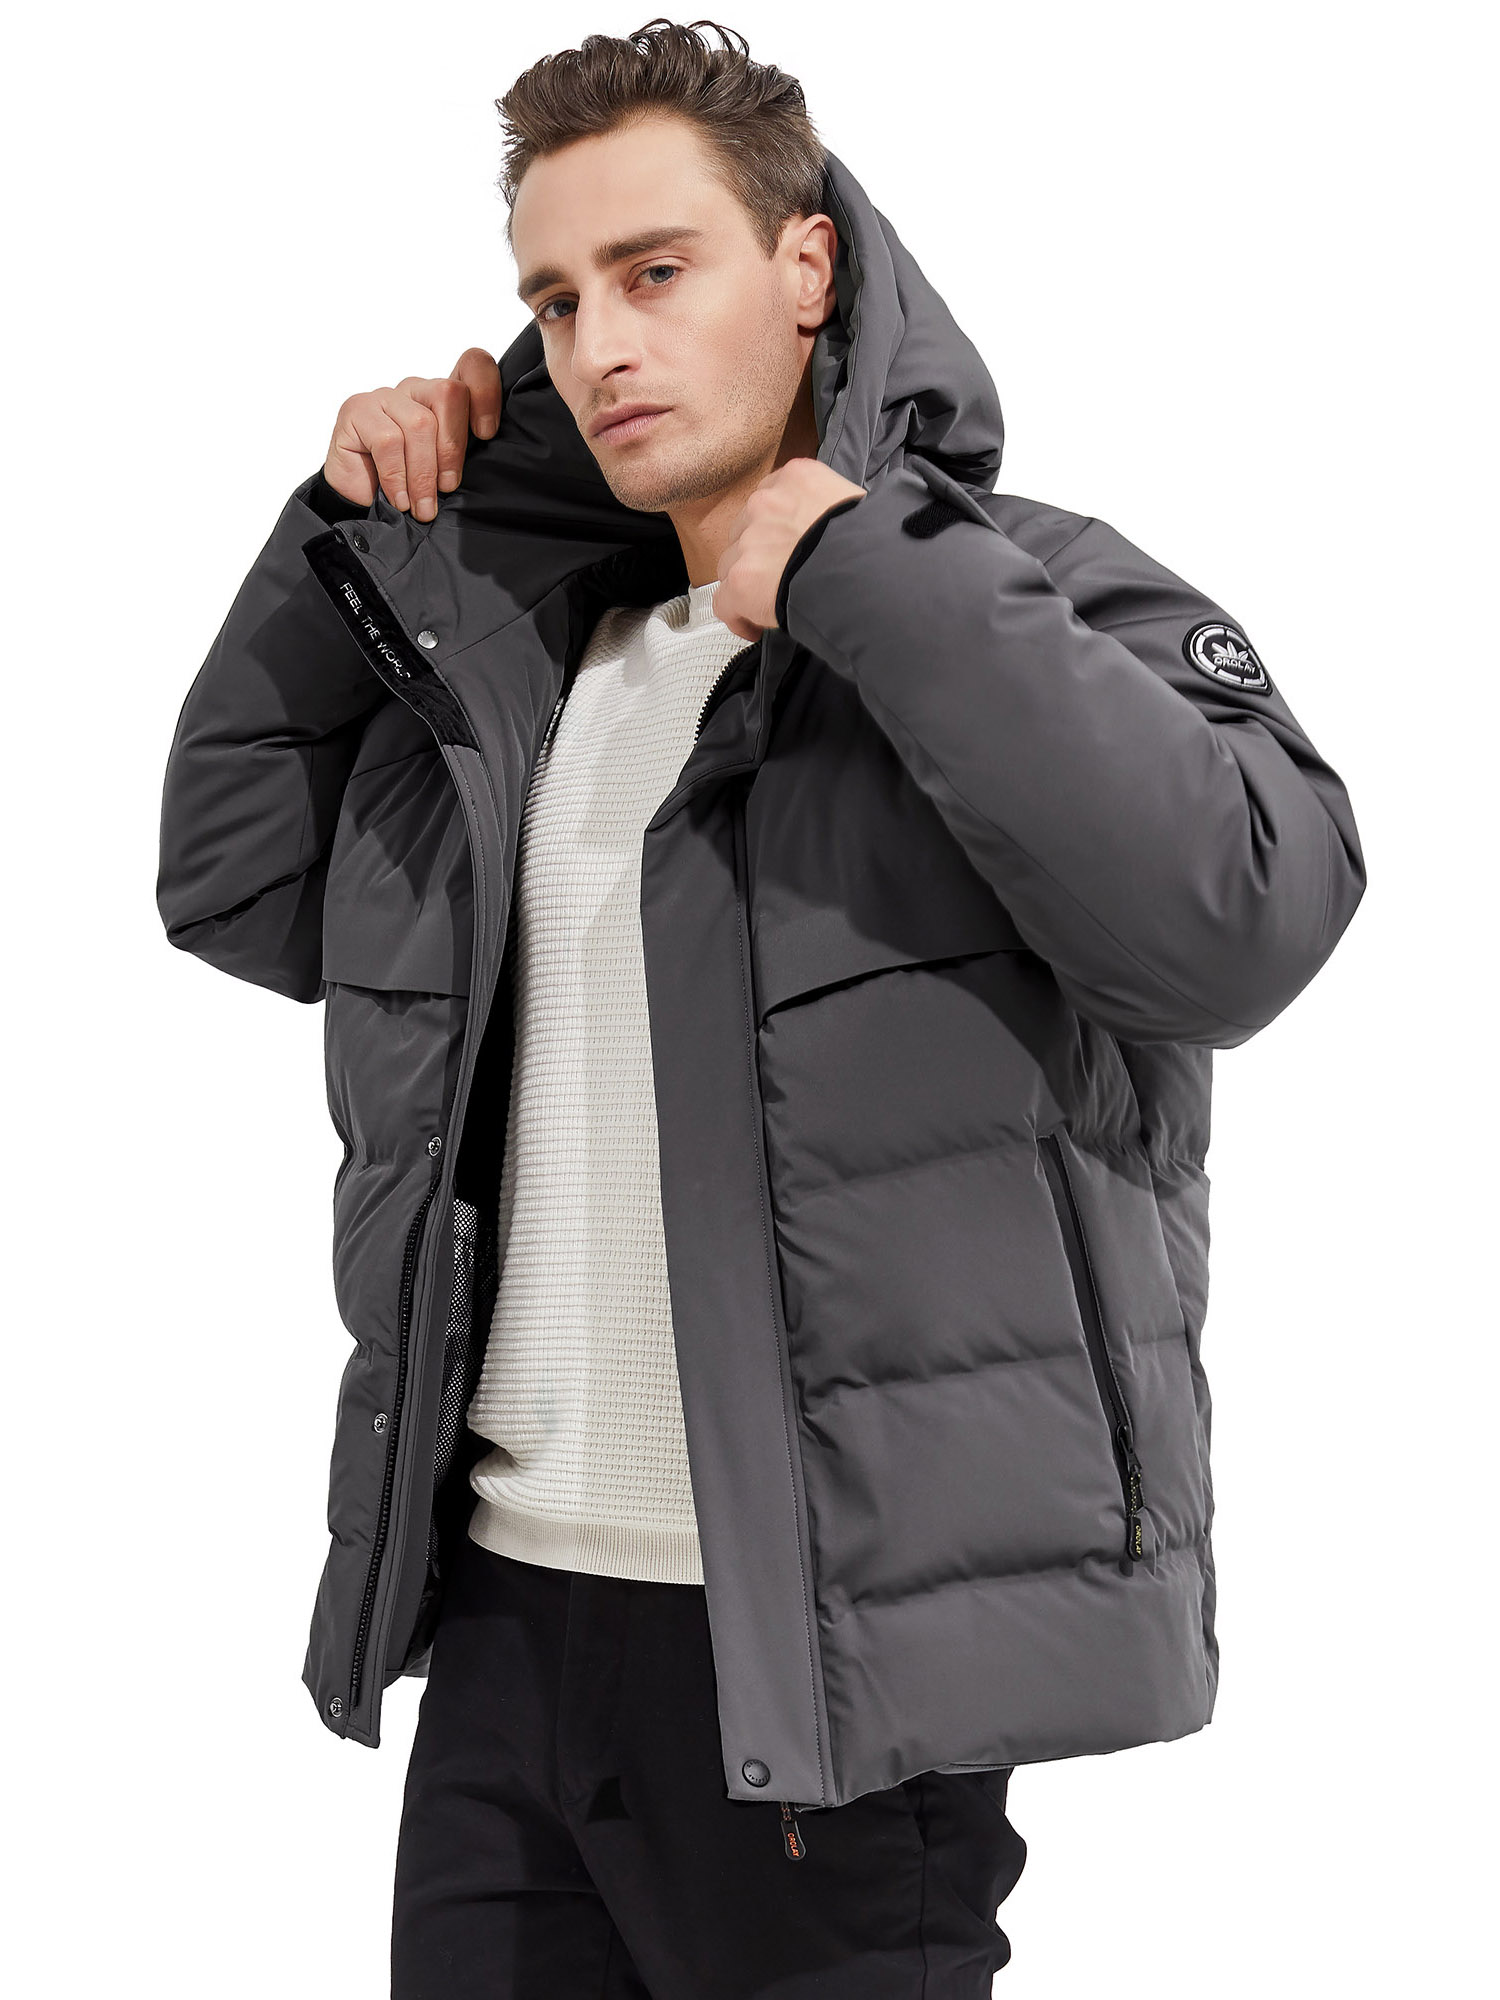 Orolay Men's Winter Down Jacket with Adjustable Drawstring Hood Ribbed Cuff - image 2 of 5